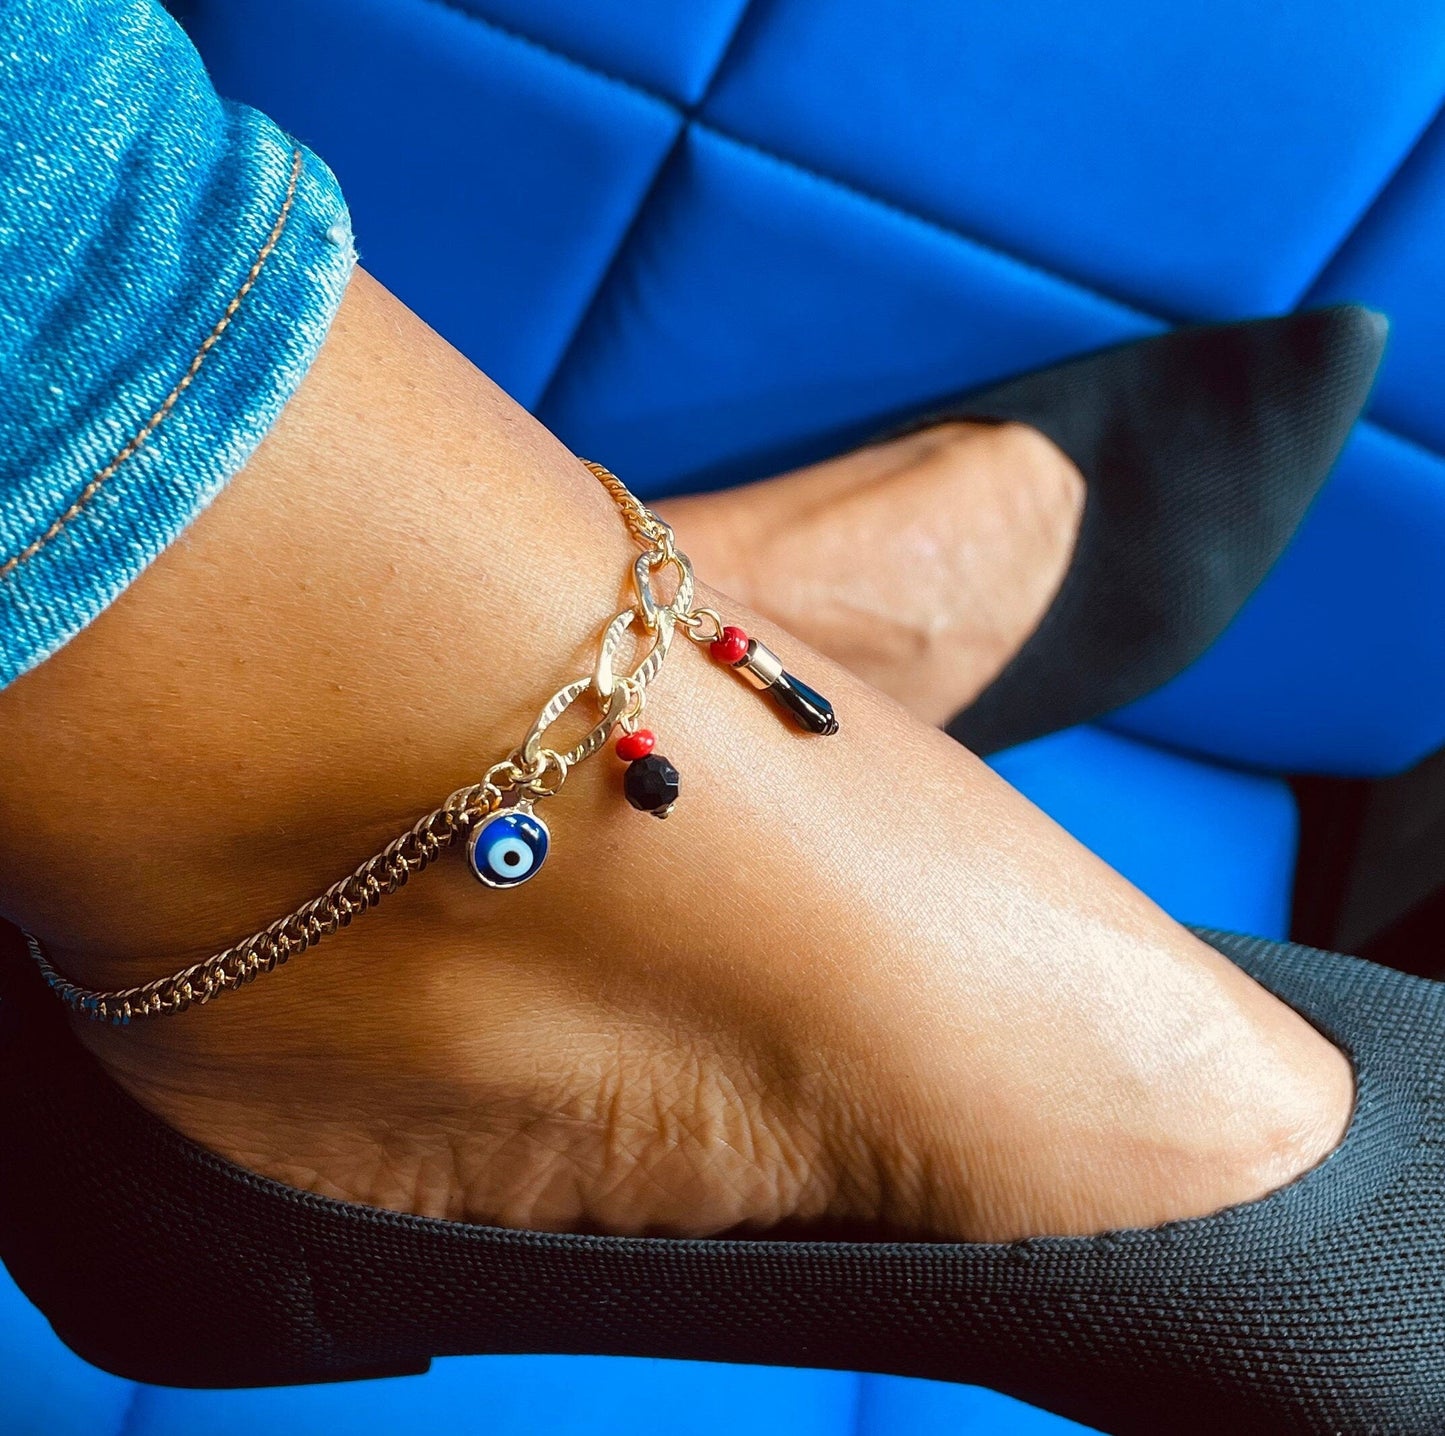 18k Gold Layered Protection Anklet Made With Cuban Link Chain And Featuring 3